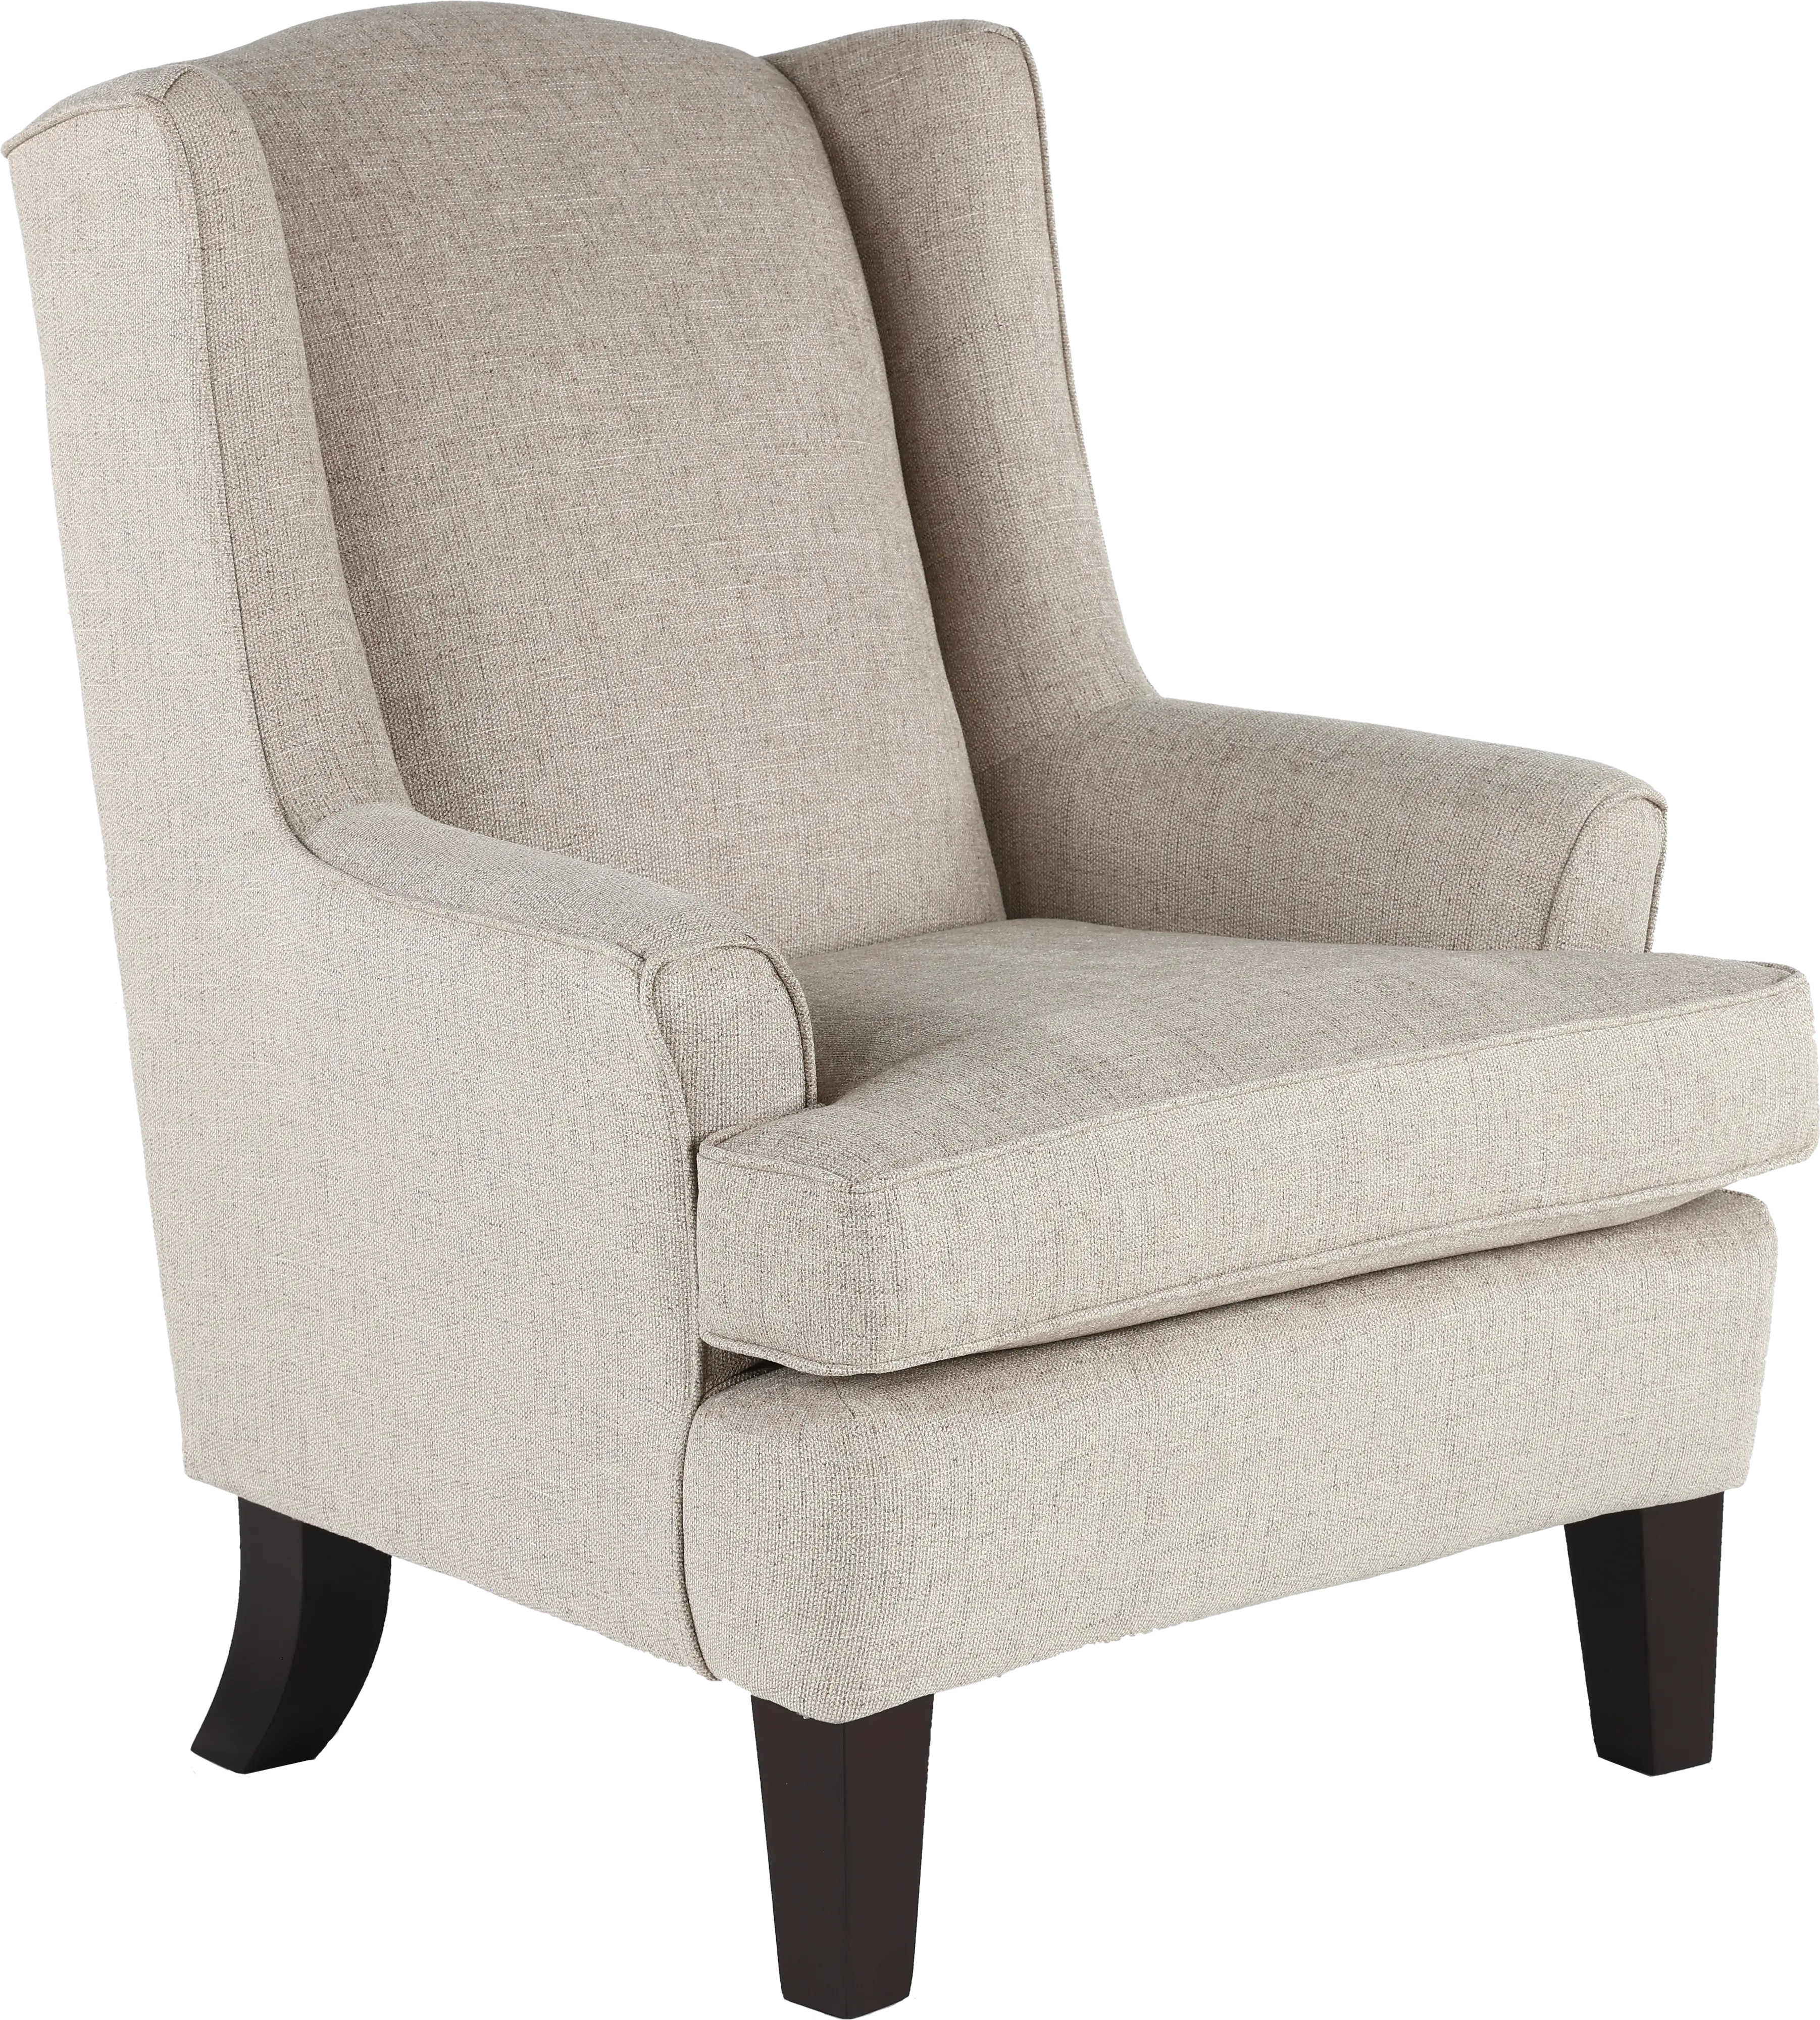 Andrea Classic Light Gray Upholstered Wingback Chair